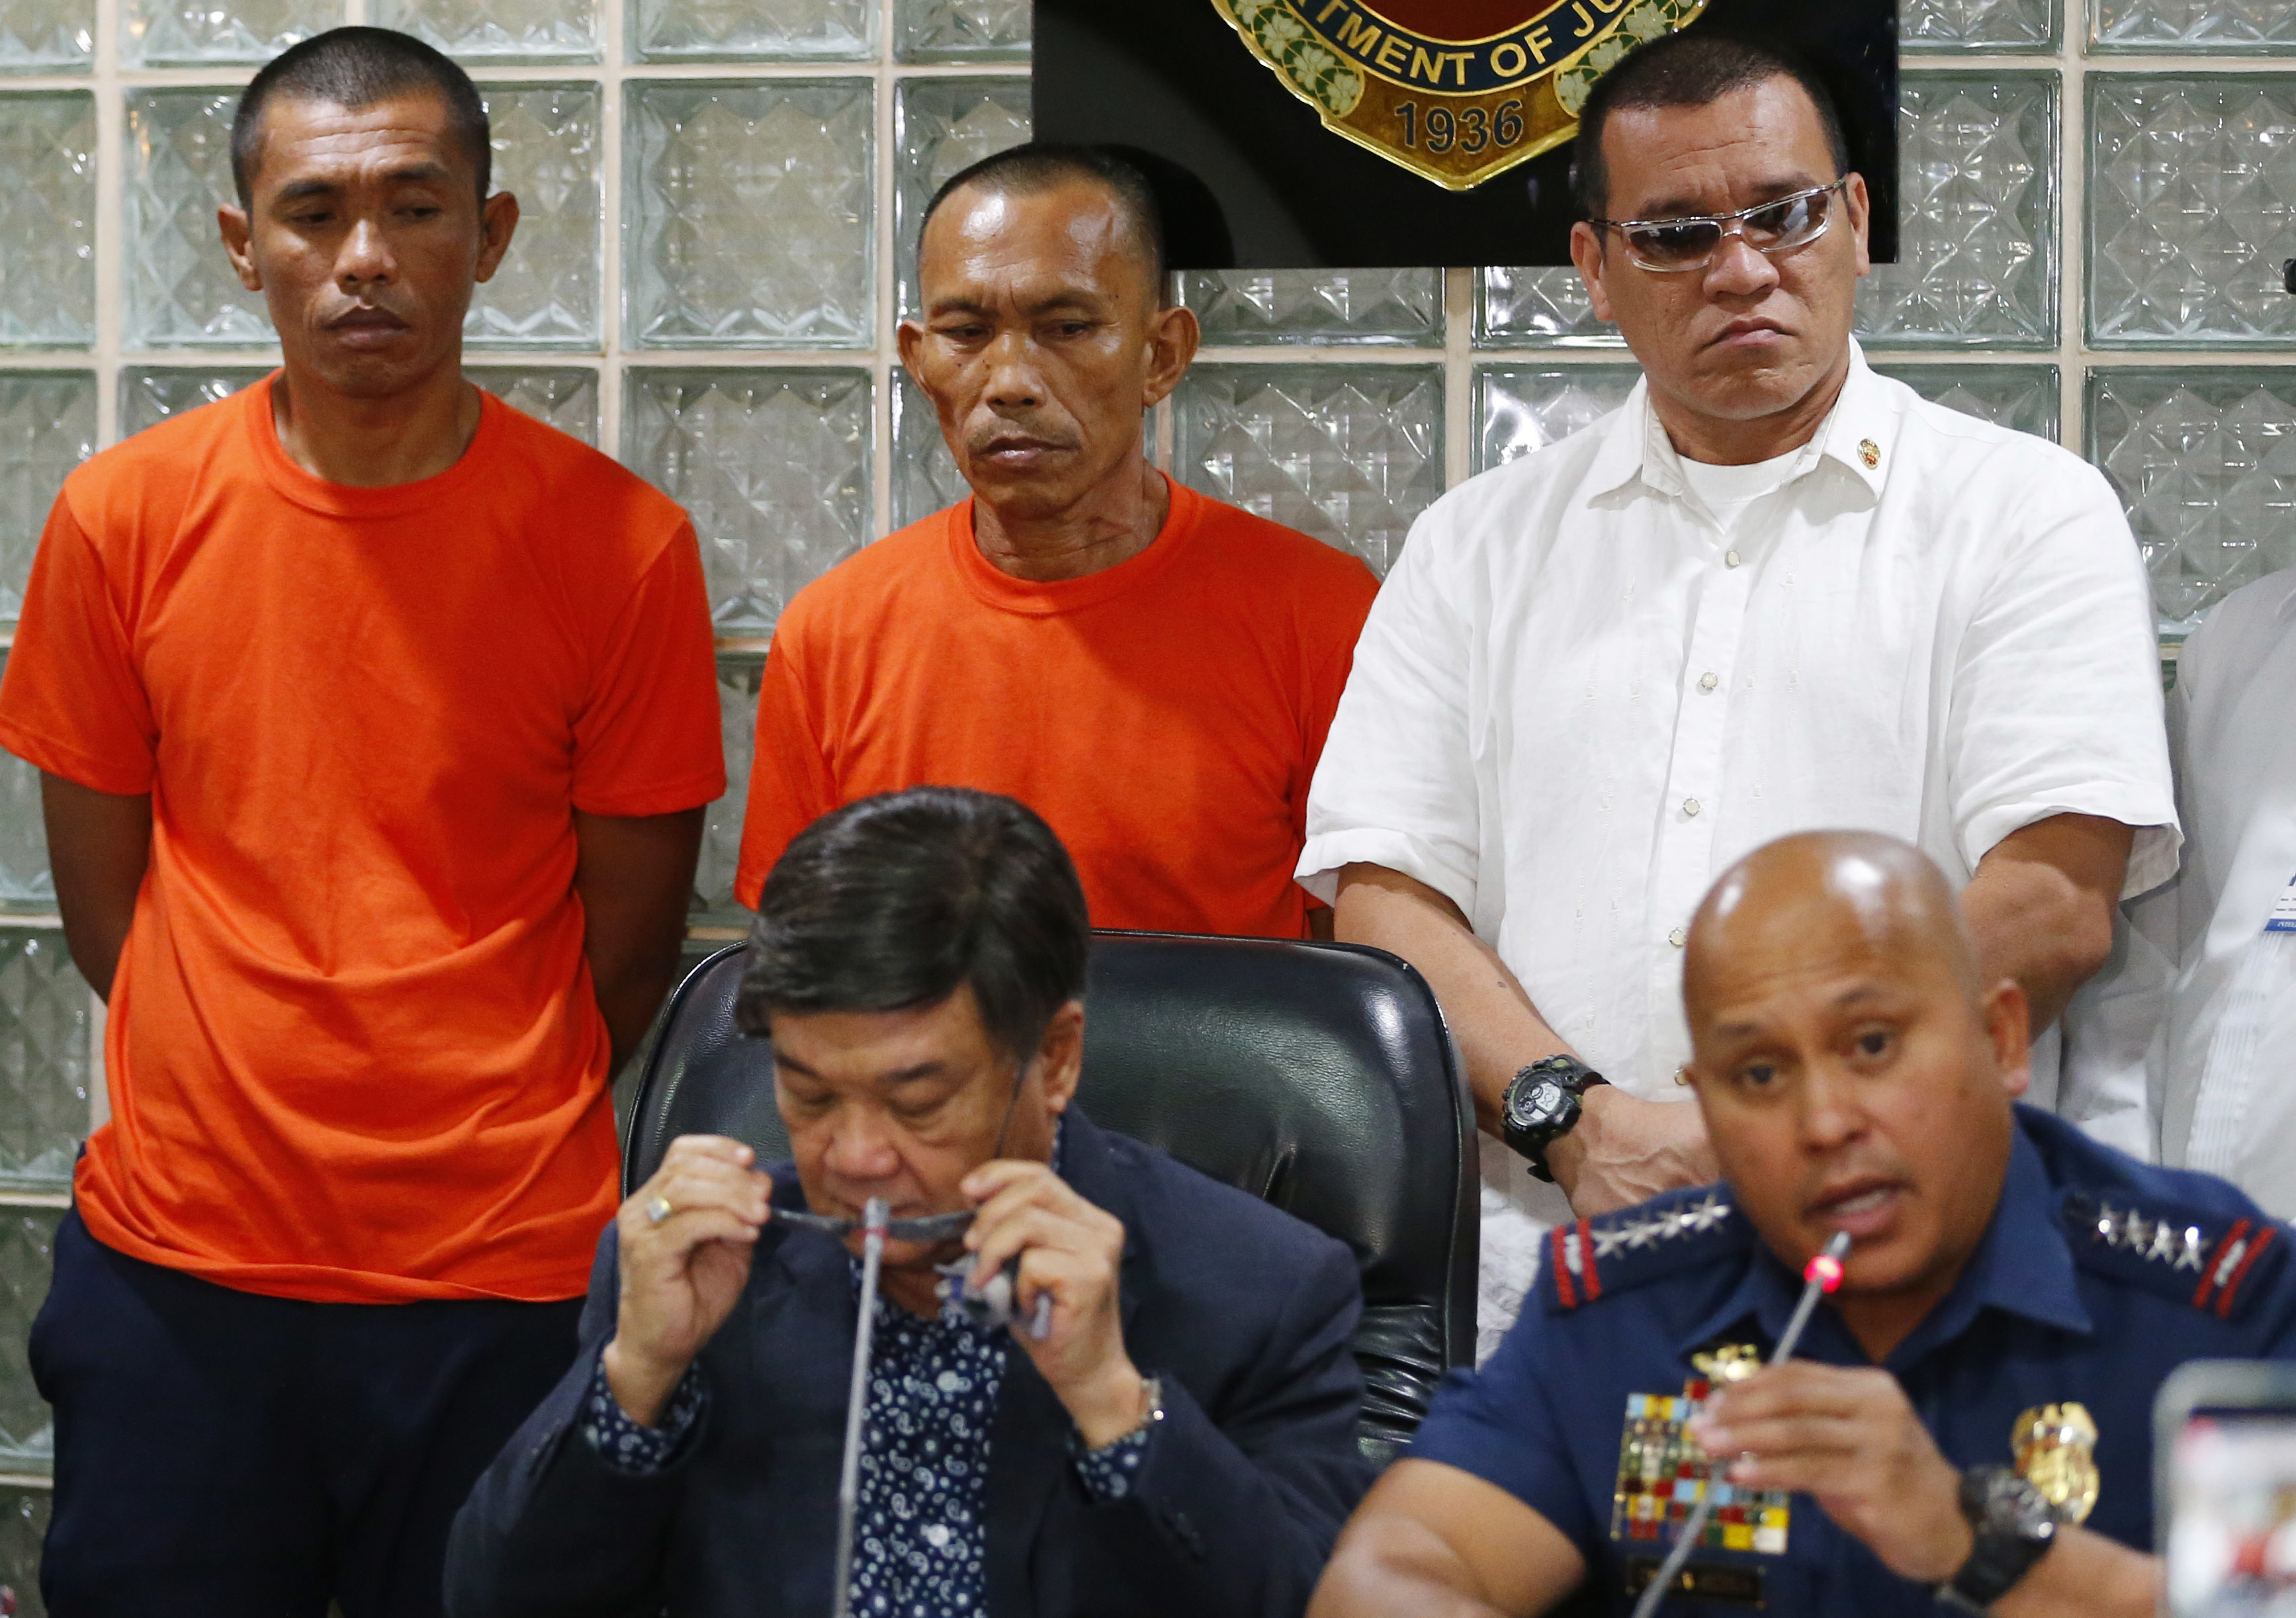 Two suspected Abu Sayyaf militants are presented to the media during a news conference at the National Bureau of Investigation headquarters, March 12, 2018 in Manila, Philippines. In their press statement, the two were arrested two weeks ago in Zamboanga, southern Philippines and were allegedly involved in kidnappings in 2001 and 2002 including that of American missionaries Martin and Gracia Burnham. (AP Photo/Bullit Marquez)